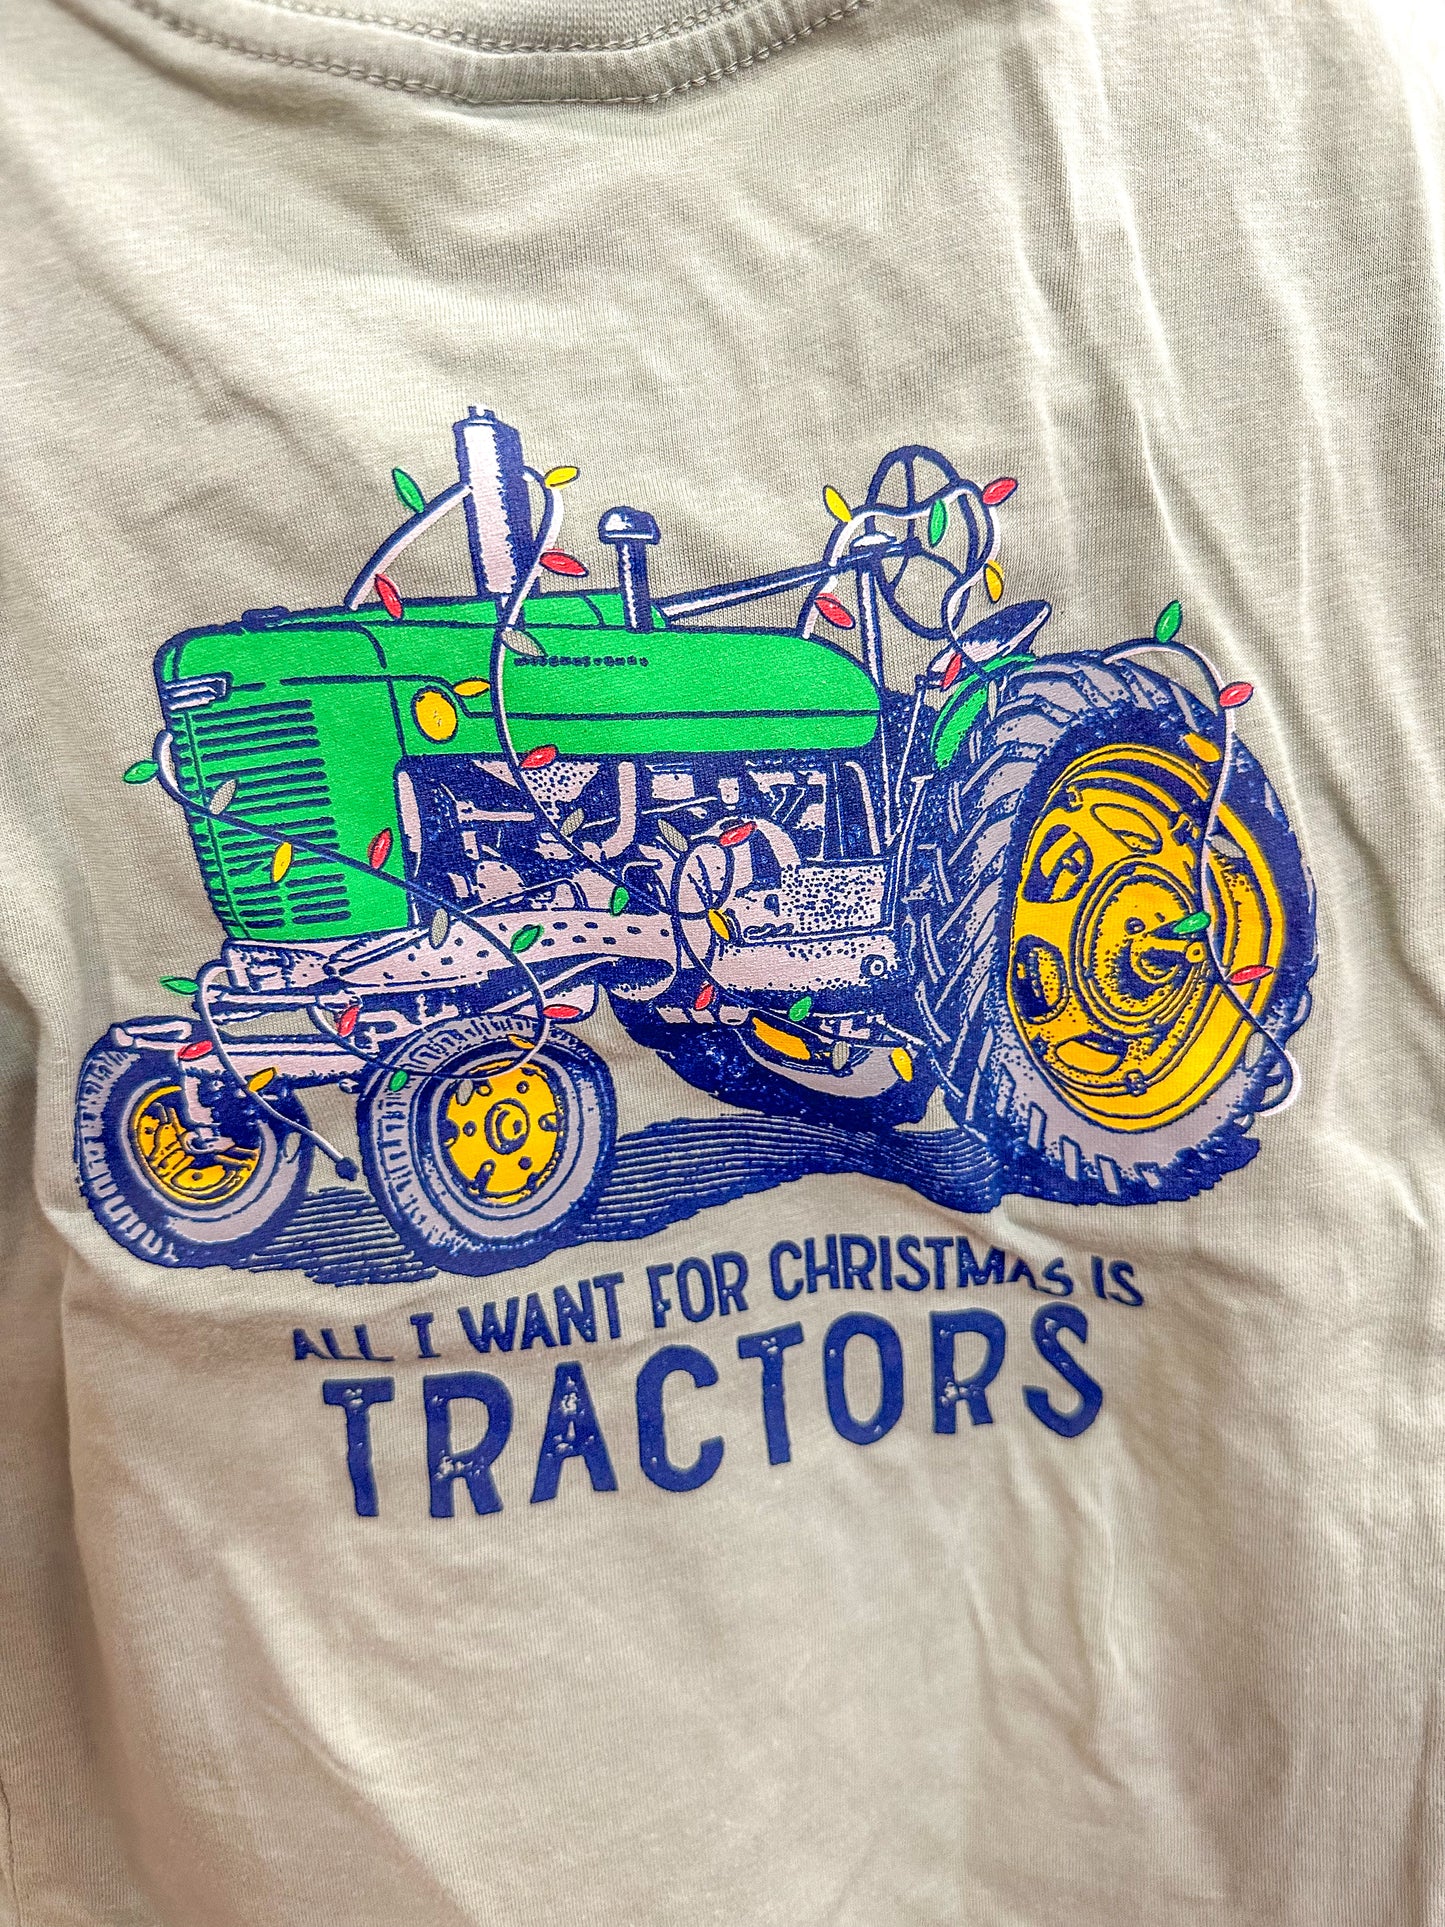 Kids - All I Want For Christmas Is Tractors Shirt